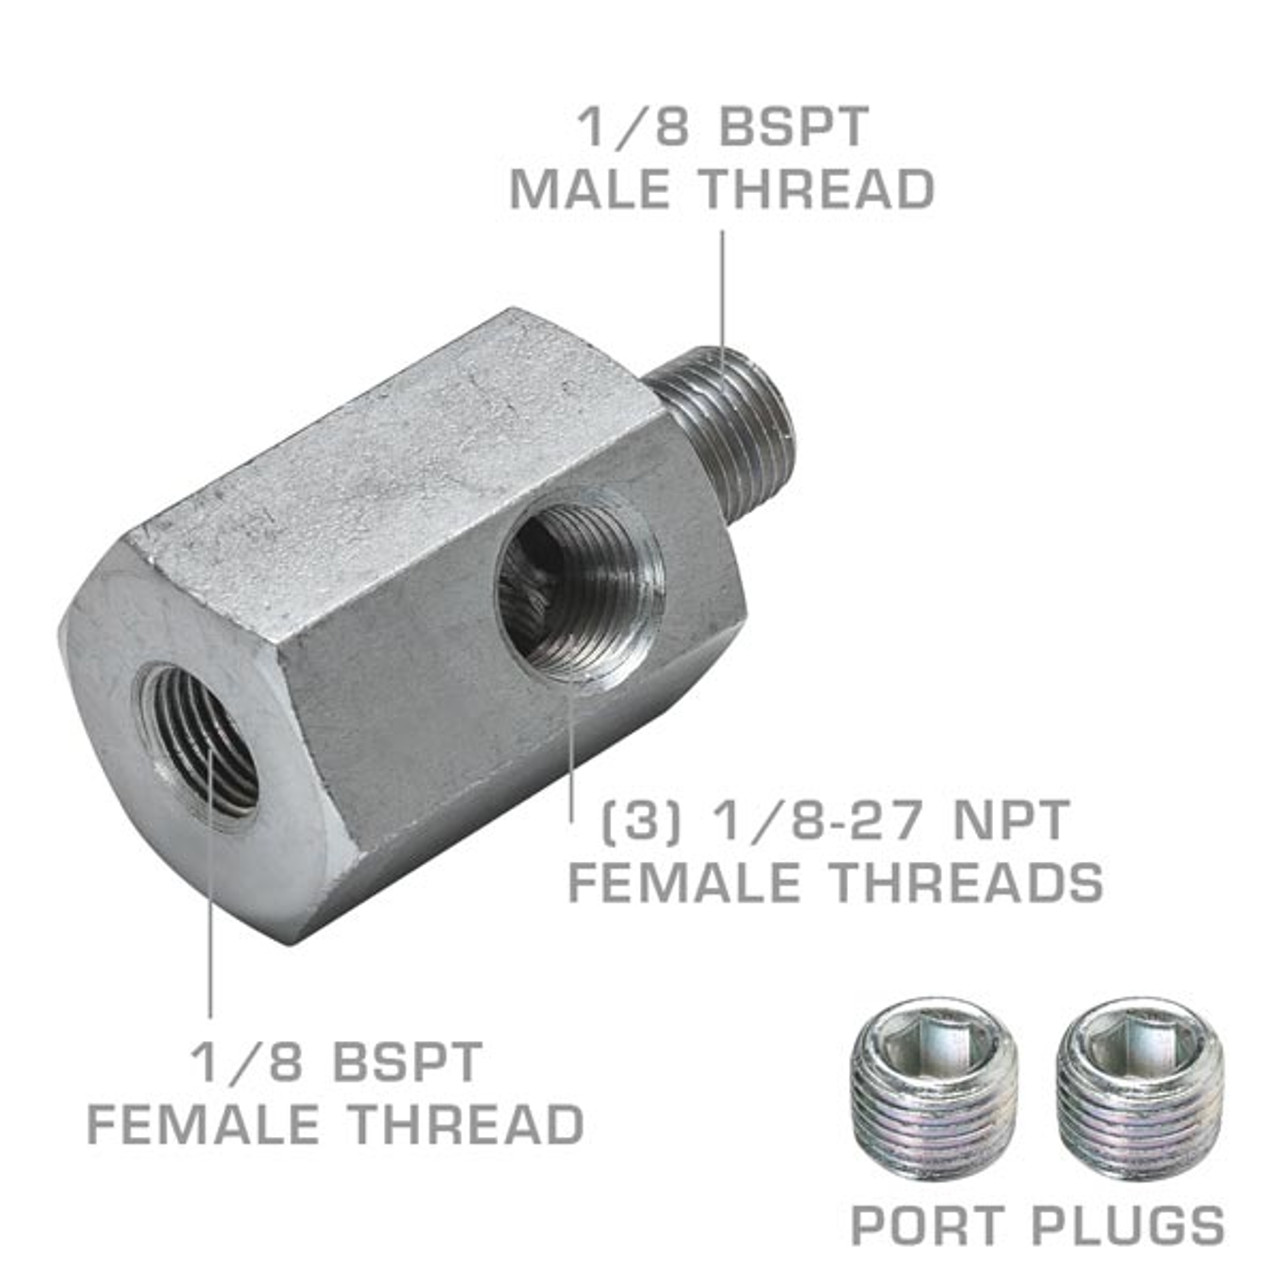 1/8 BSPT Male to 1/8-27 NPT Female Hex Thread Adapter